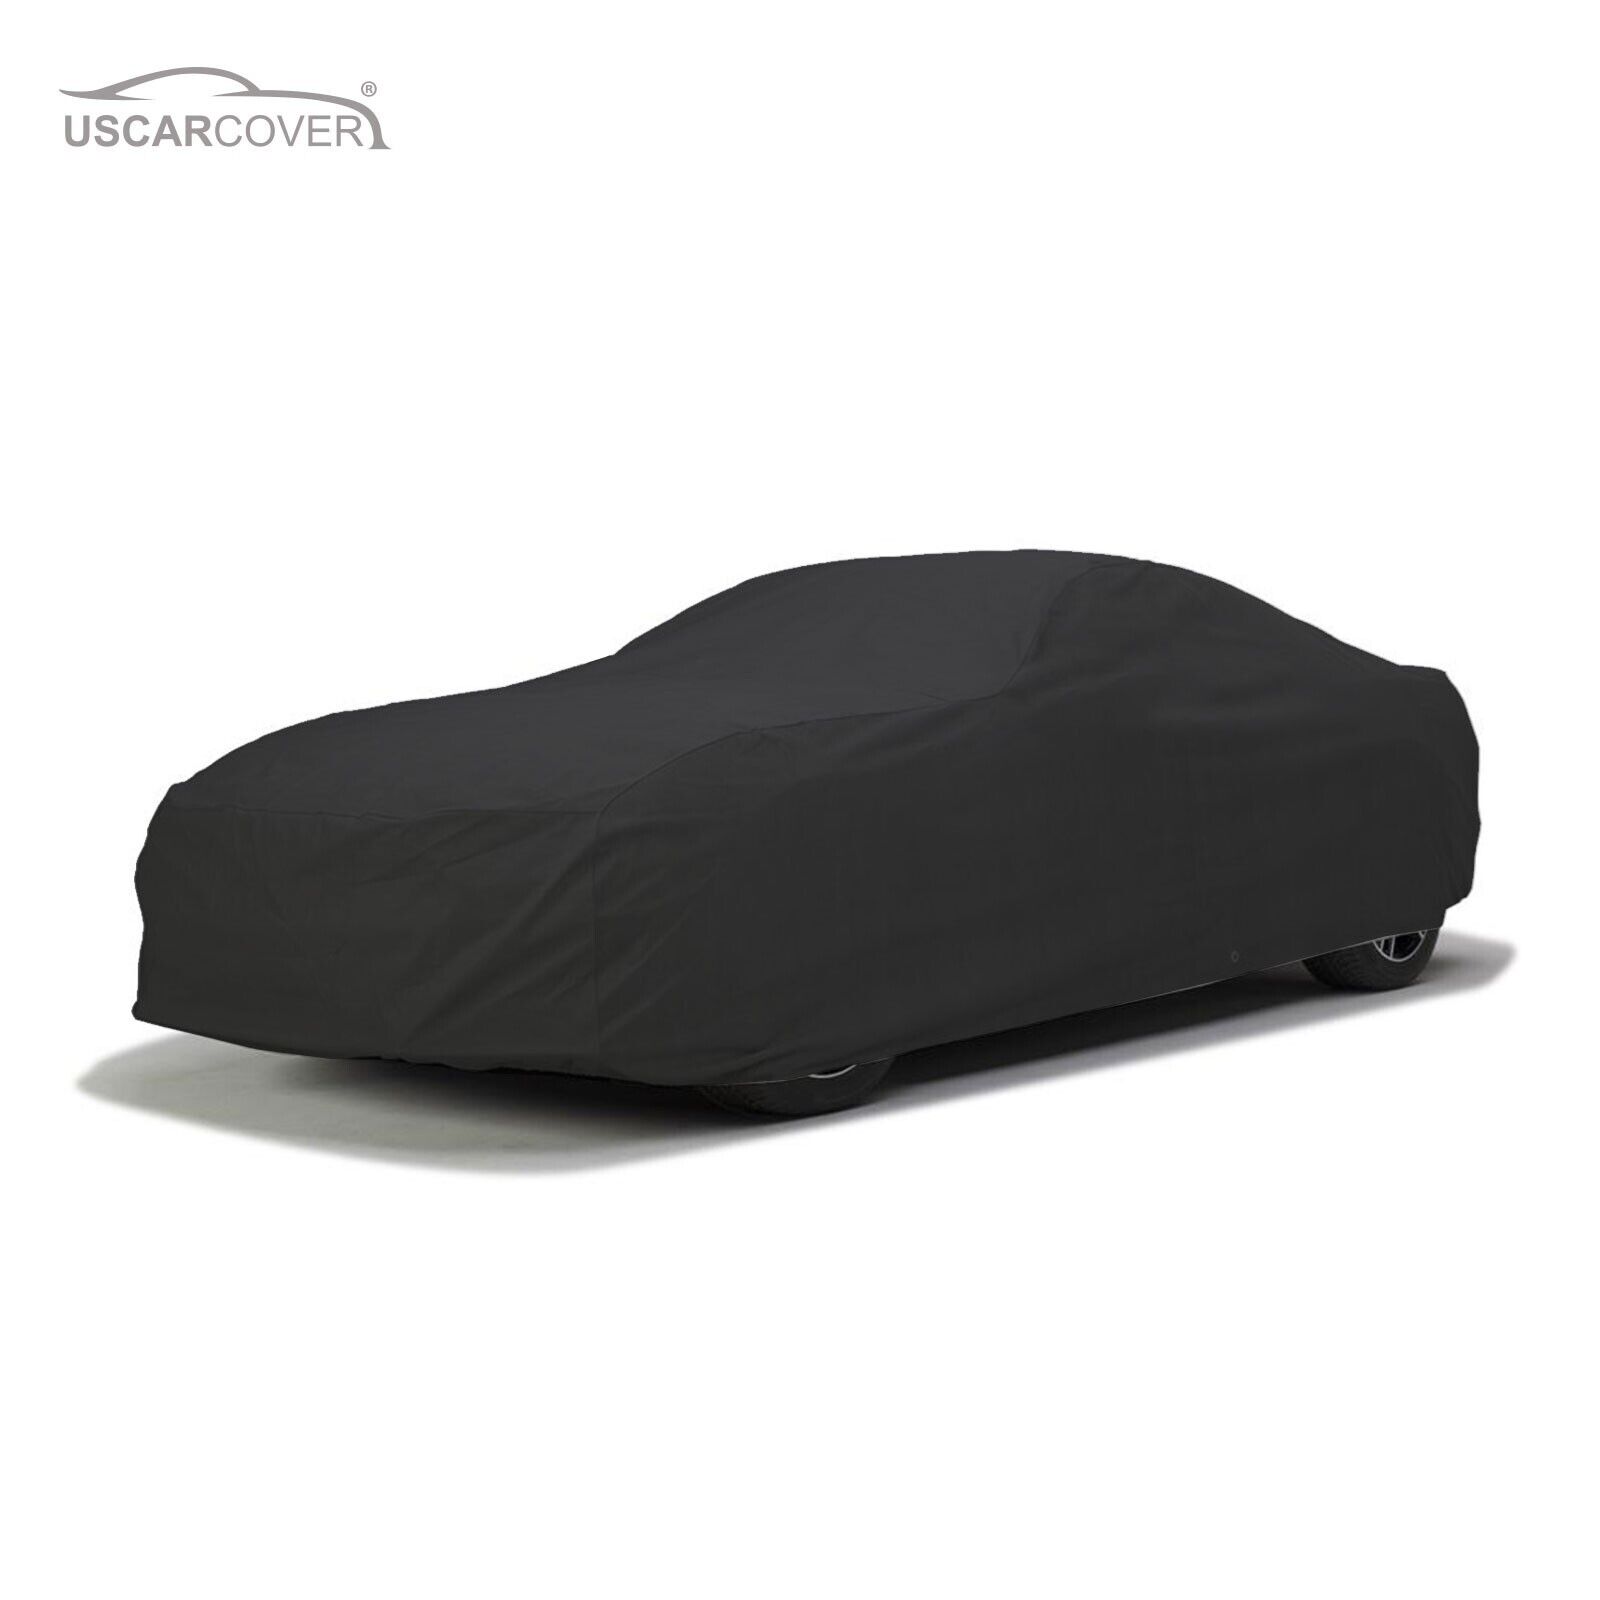 SoftTec Stretch Satin Indoor Car Cover for Ford Crown Victoria 1992-2011 Sedan